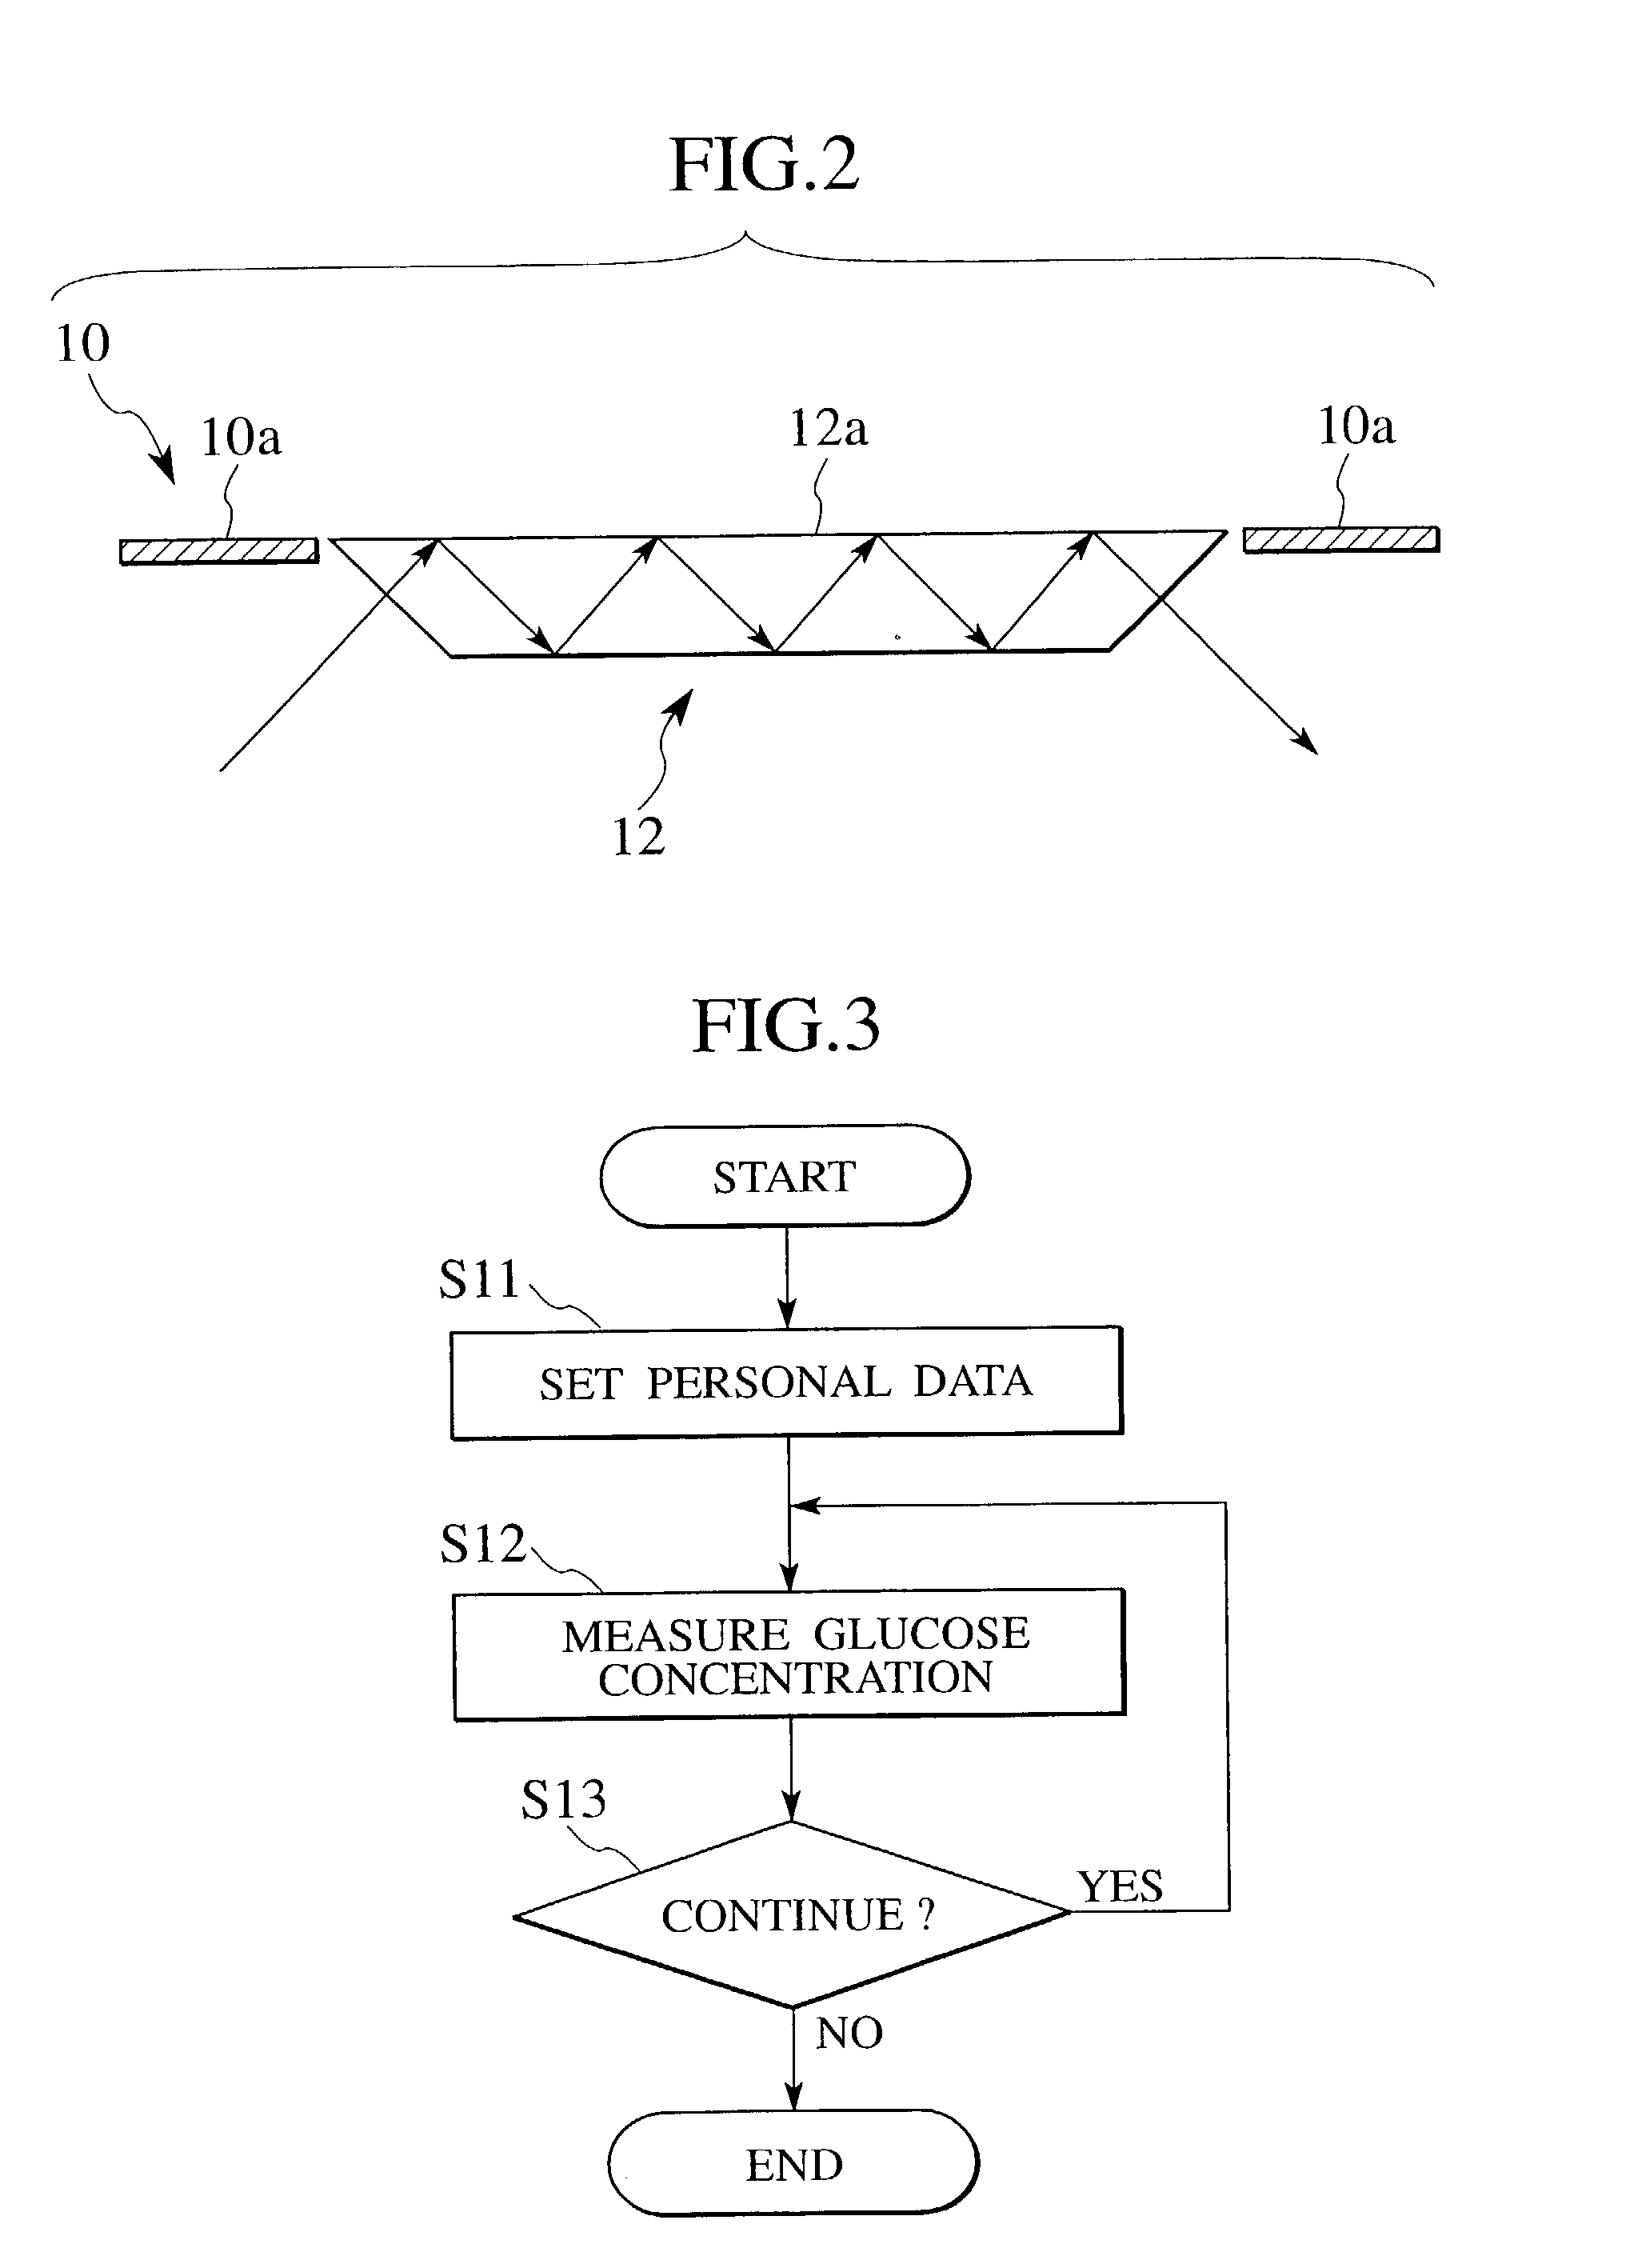 Apparatus for measuring glucose concentration